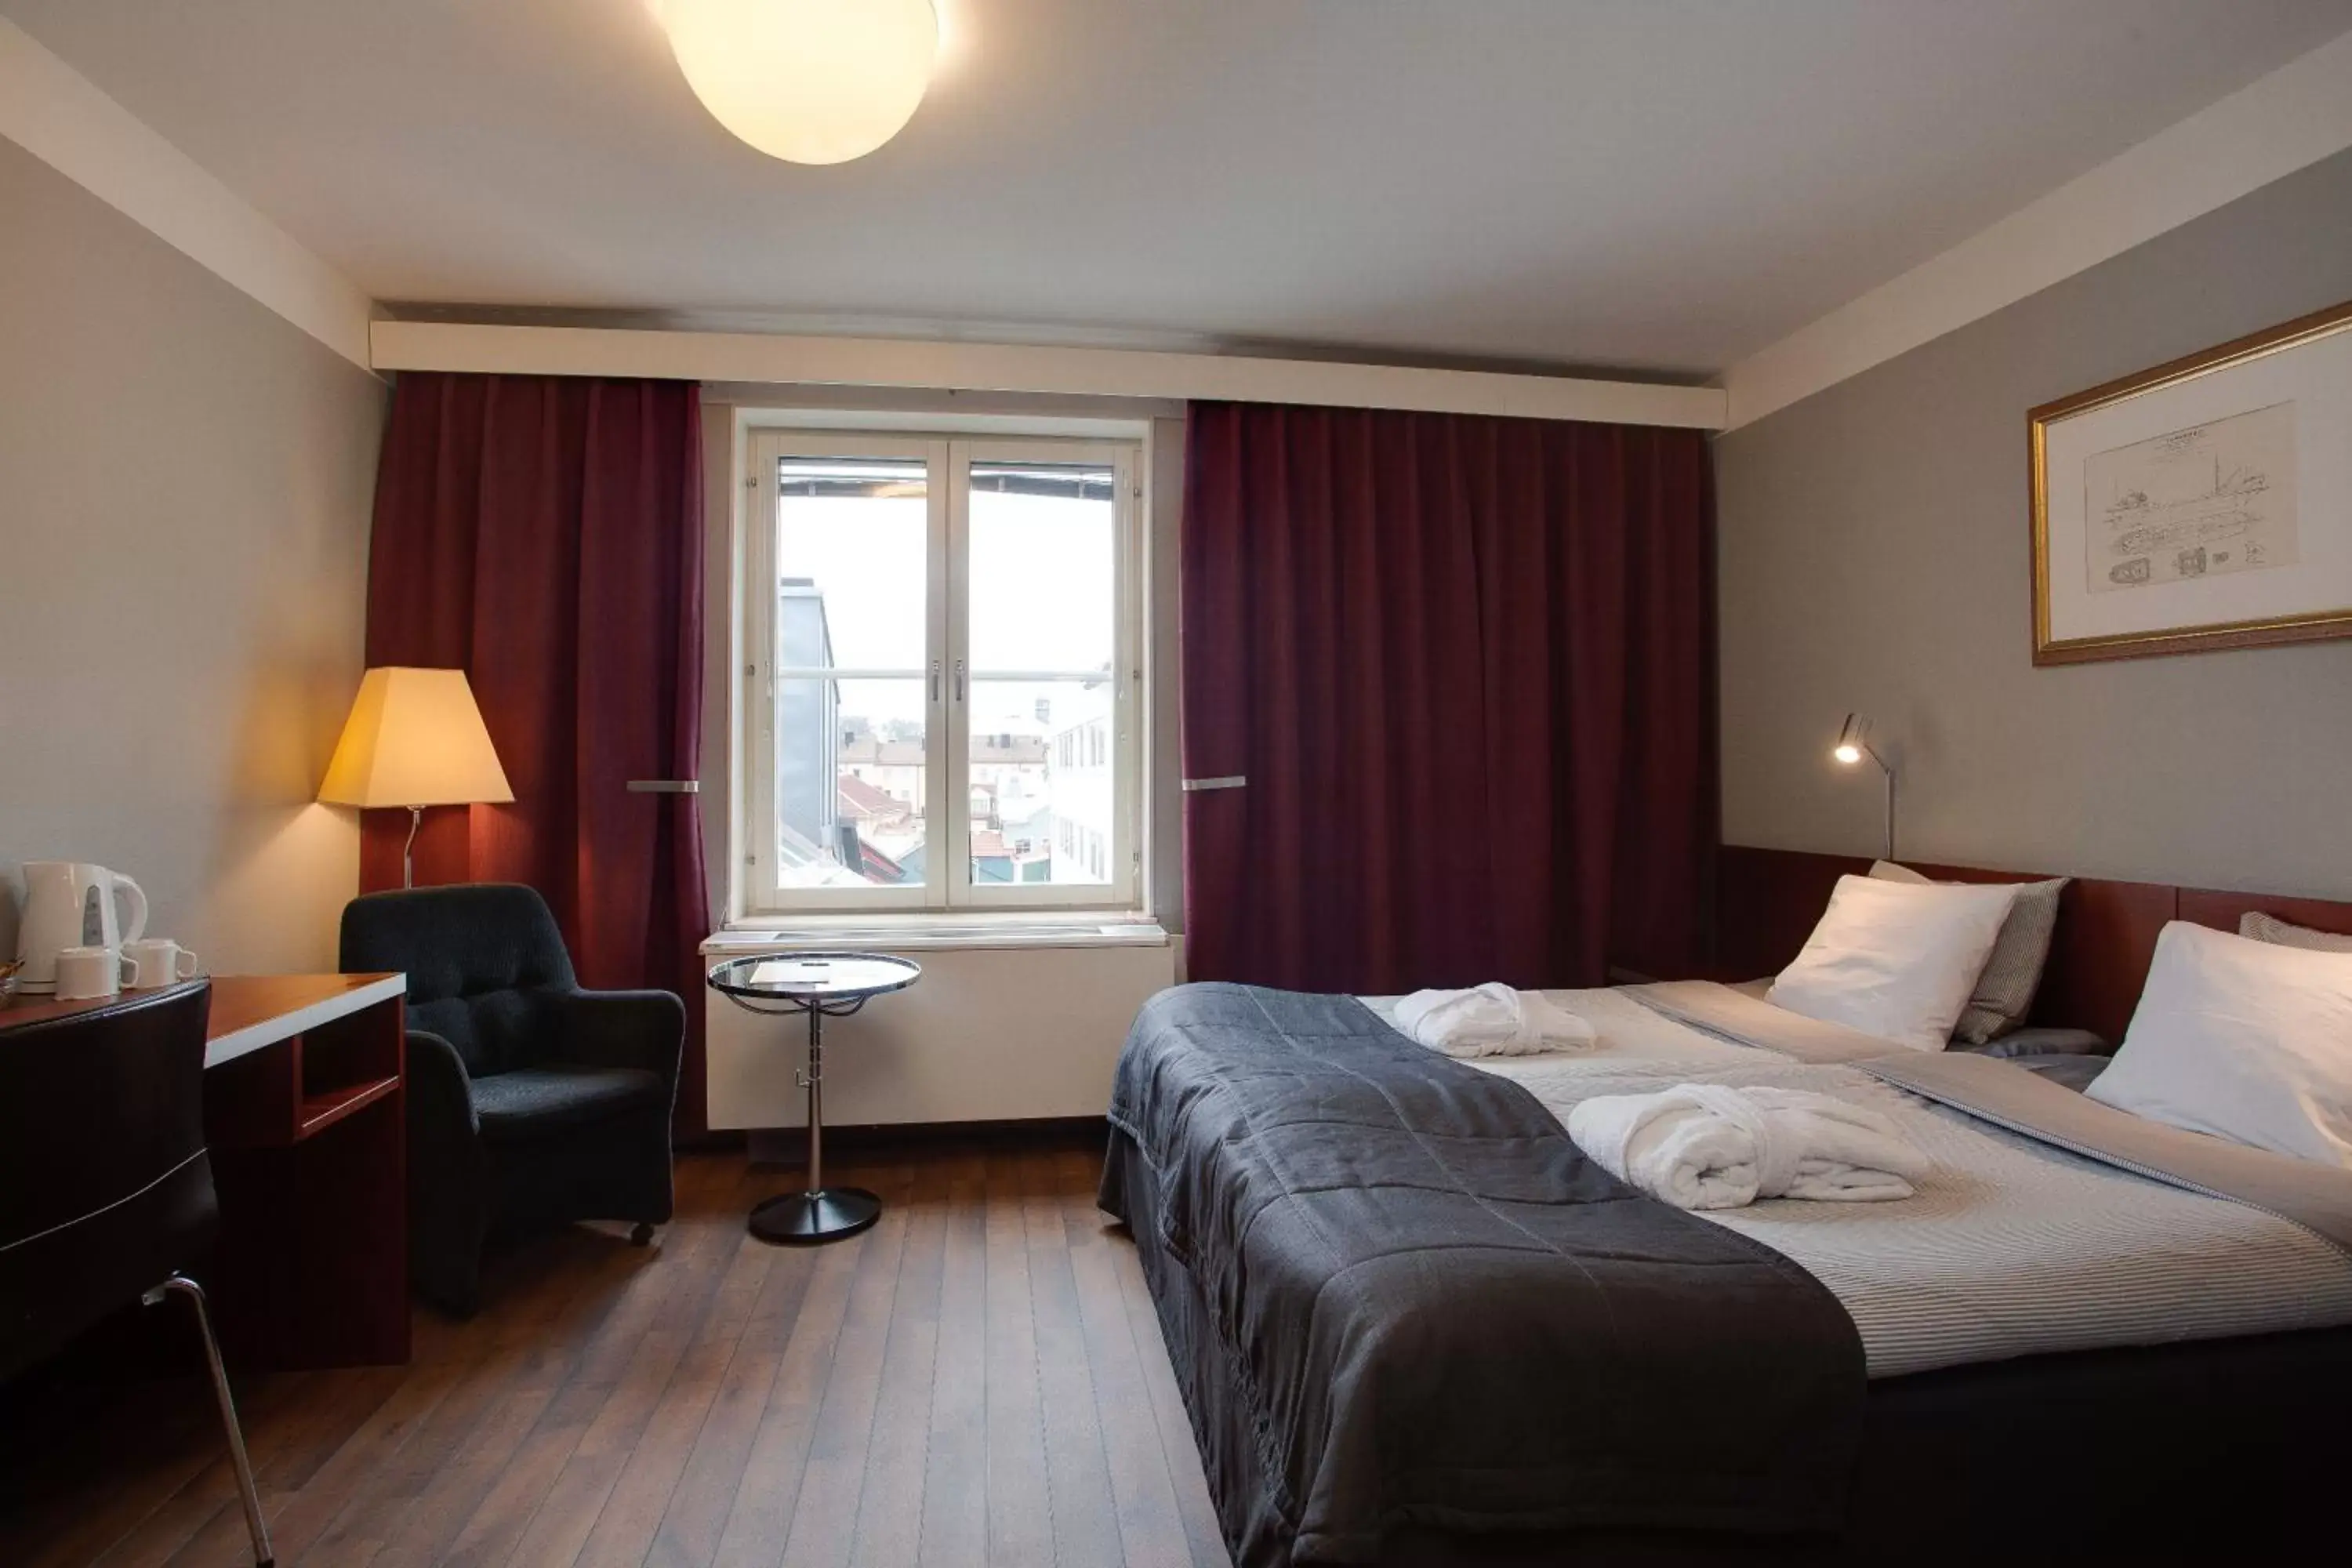 Facility for disabled guests, Bed in Best Western Plus Västerviks Stadshotell